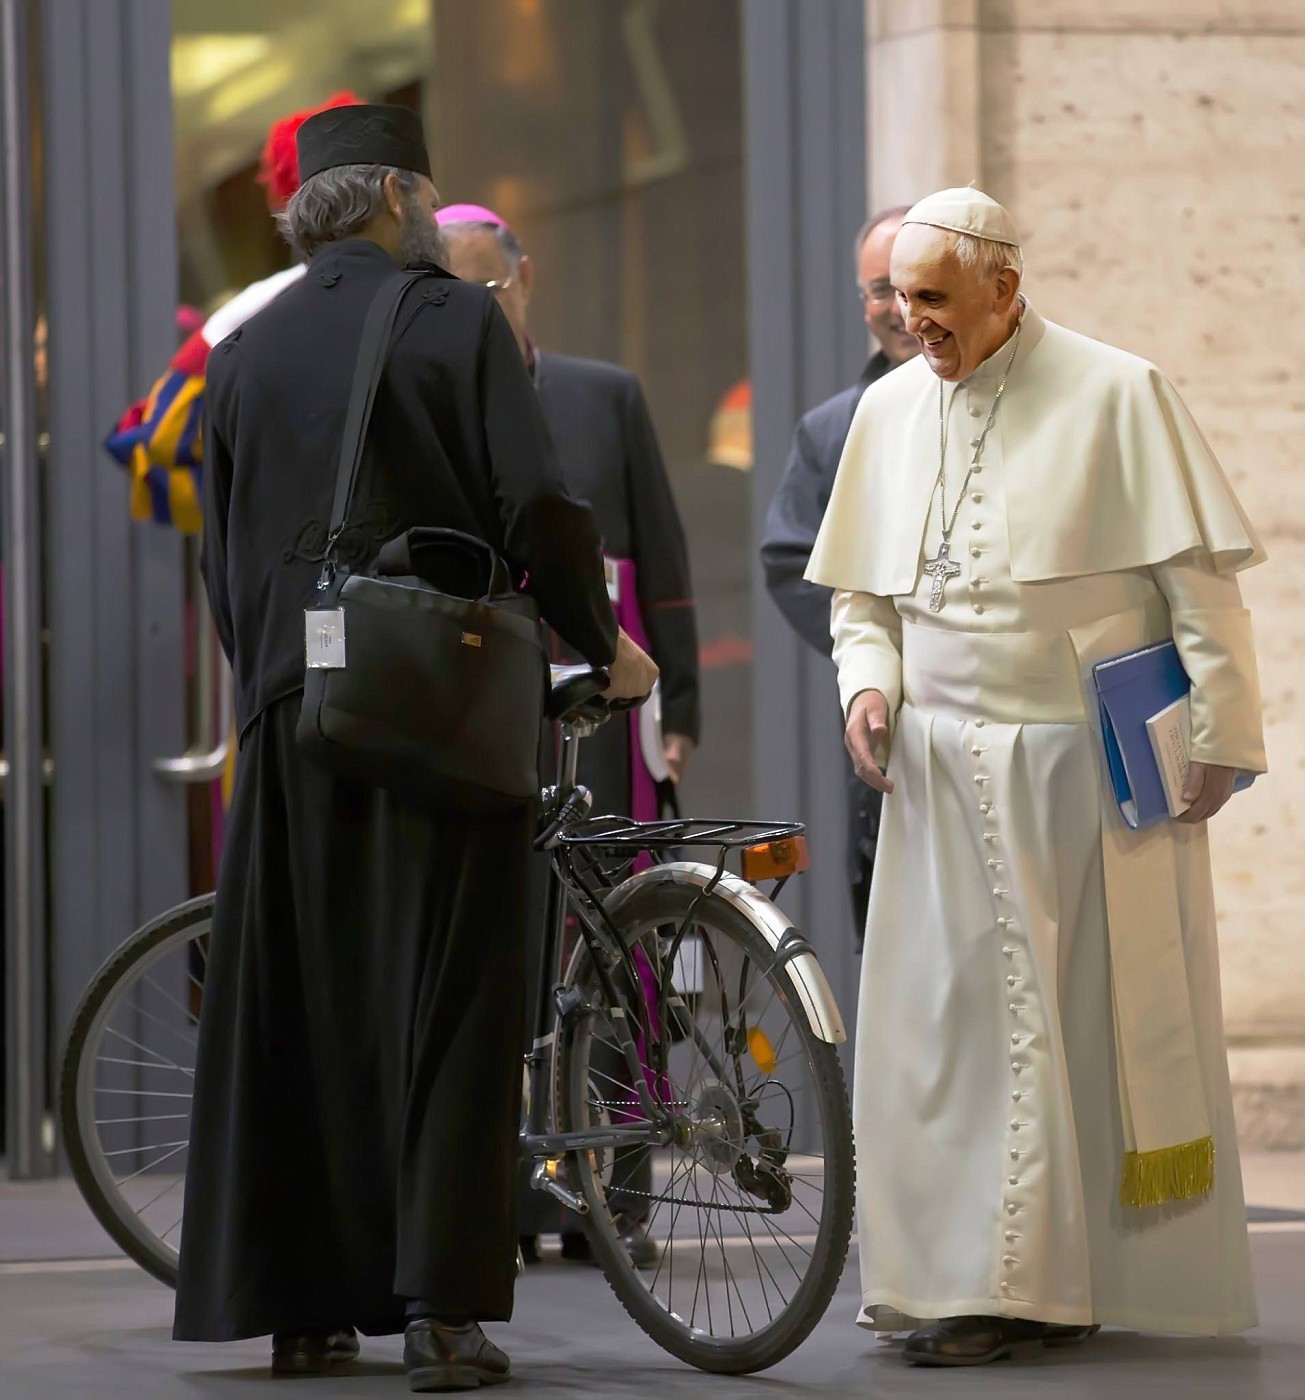 Hi Pope, how about a little bike ride? :o)